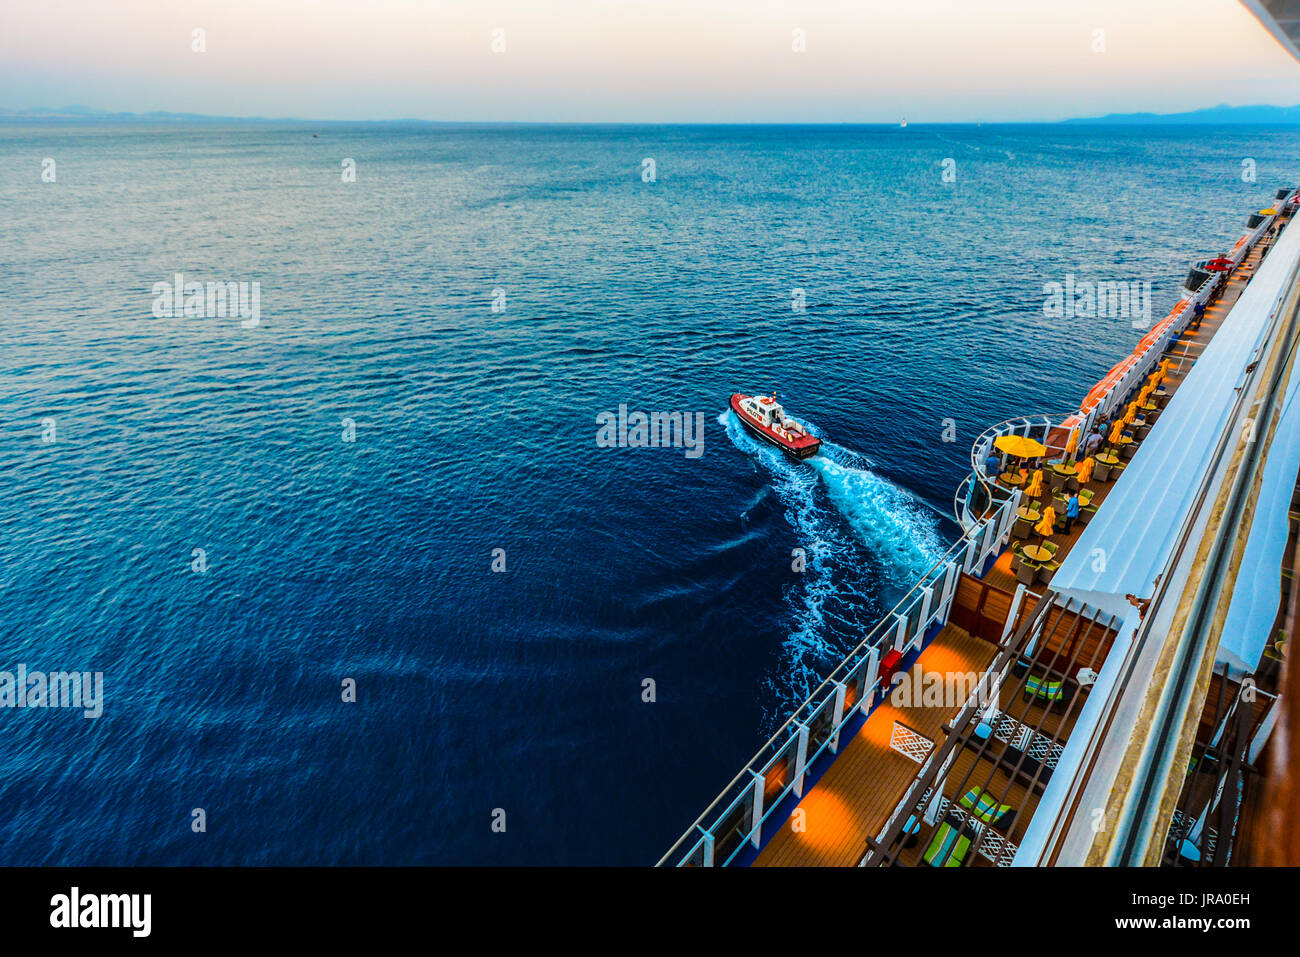 Small pilot boat pulling away from a large cruise ship at departure in the Mediterranean sea Stock Photo